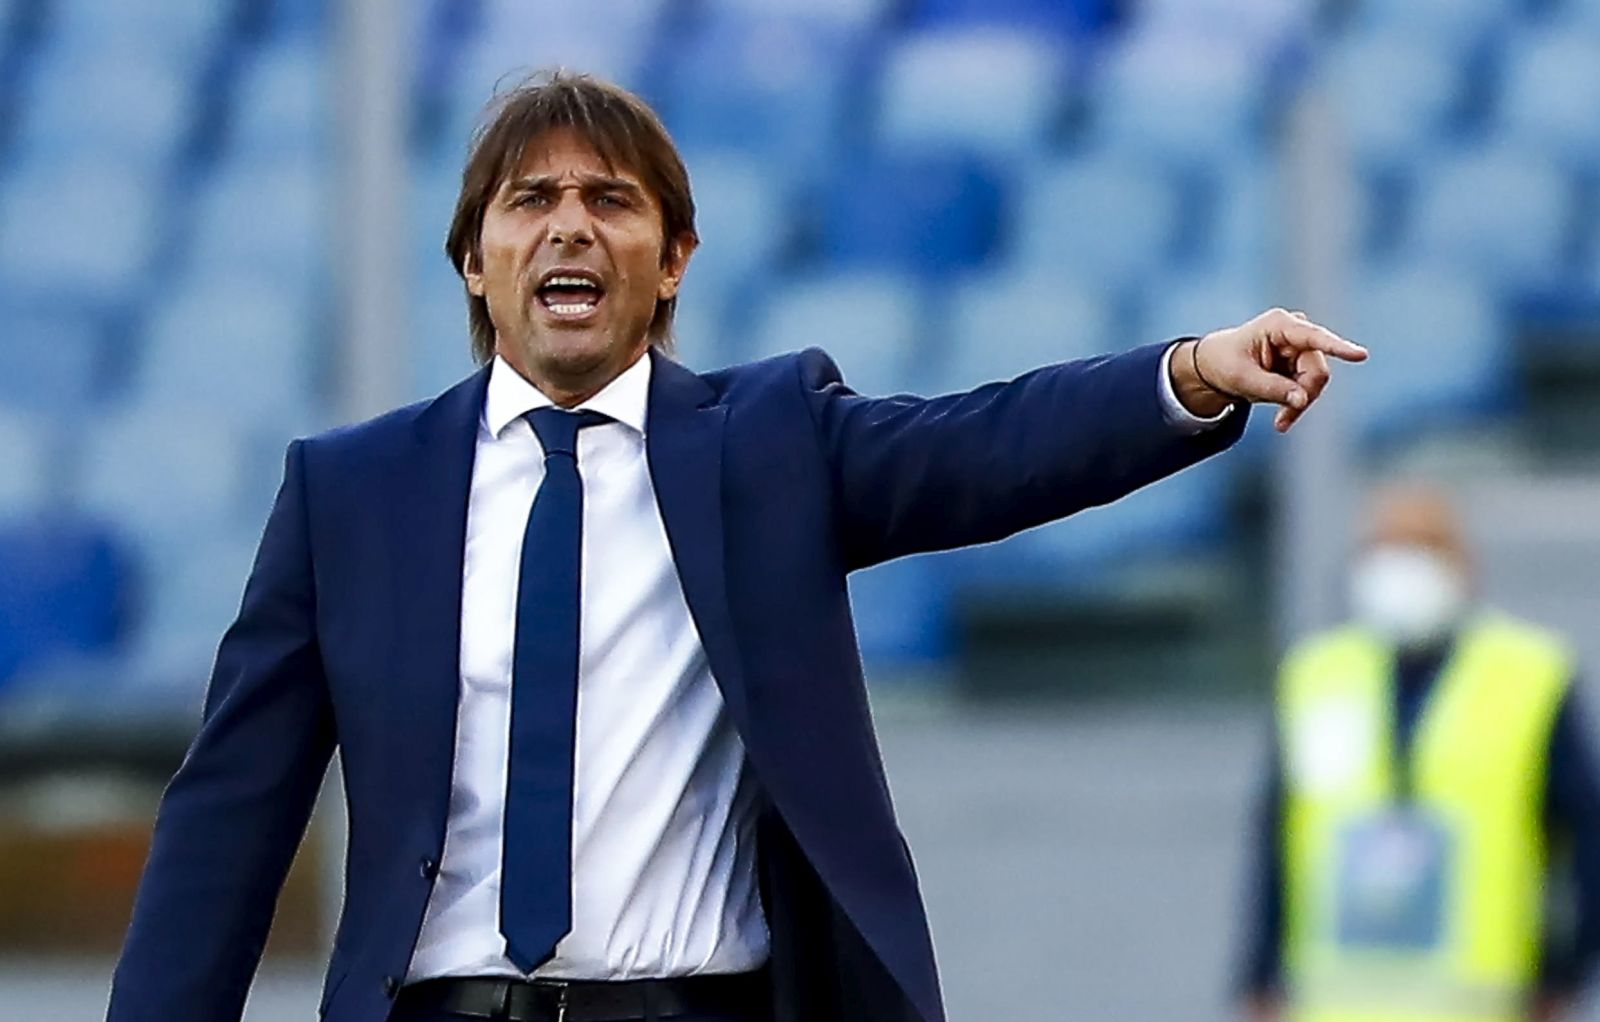 epa09229615 (FILE) - Inter's coach Antonio Conte gestures during  the Italian Serie A soccer match SS Lazio vs FC Inter at Olimpico stadium in Rome, Italy, 04 October 2020 (re-issued on 26 May 2021). On 26 May 2021 FC Inter Milan announced that Antonio Conte will no longer be the first team's head coach. Inter confirmed the termination of Conte's contract by mutual consent.  EPA/ANGELO CARCONI *** Local Caption *** 56395095